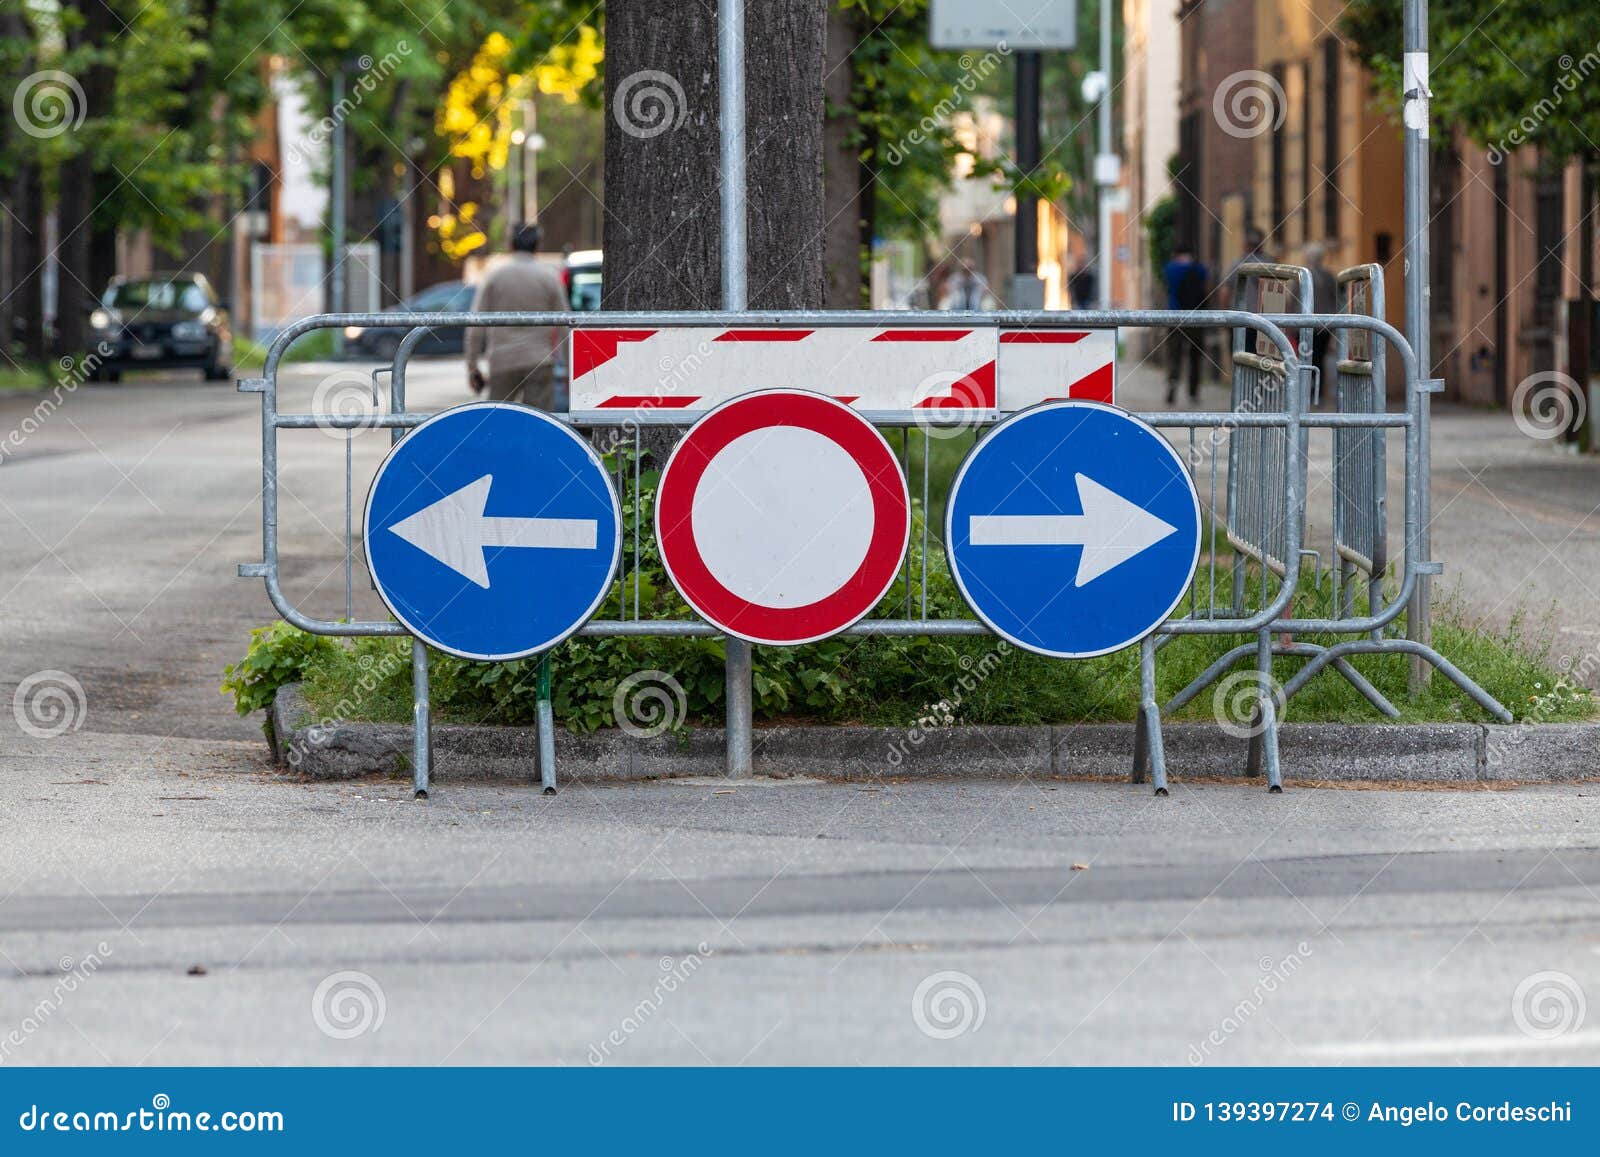 road signs. deviation on the route, signaling of an obstacle and deflection arrows to avoid it.